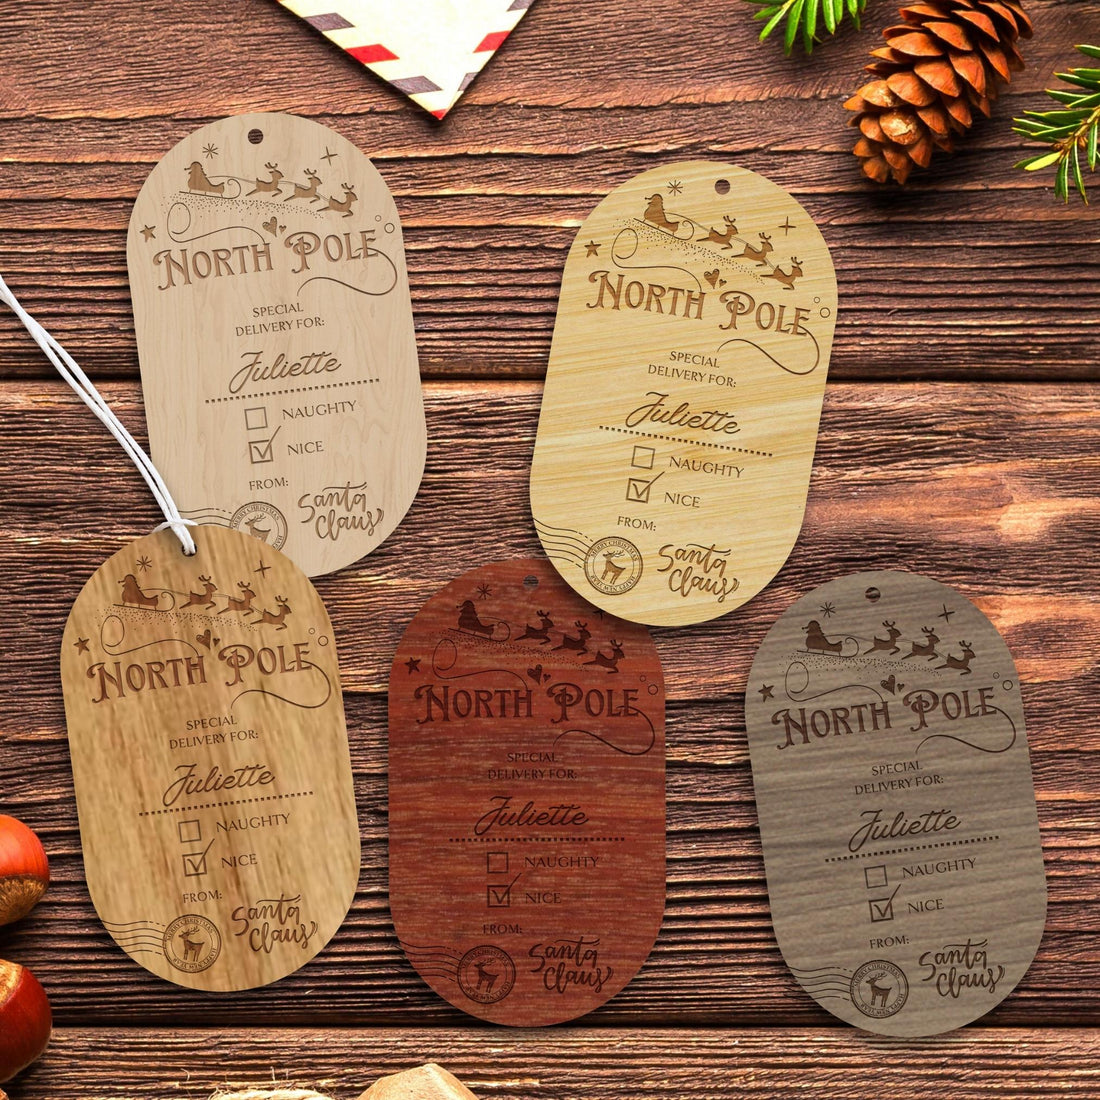 Custom Engraved Wooden/ Acrylic Christmas Gift Tags, Personalised Santa Special Delivery Present Swing Tag, North Pole Express Stocking Tag